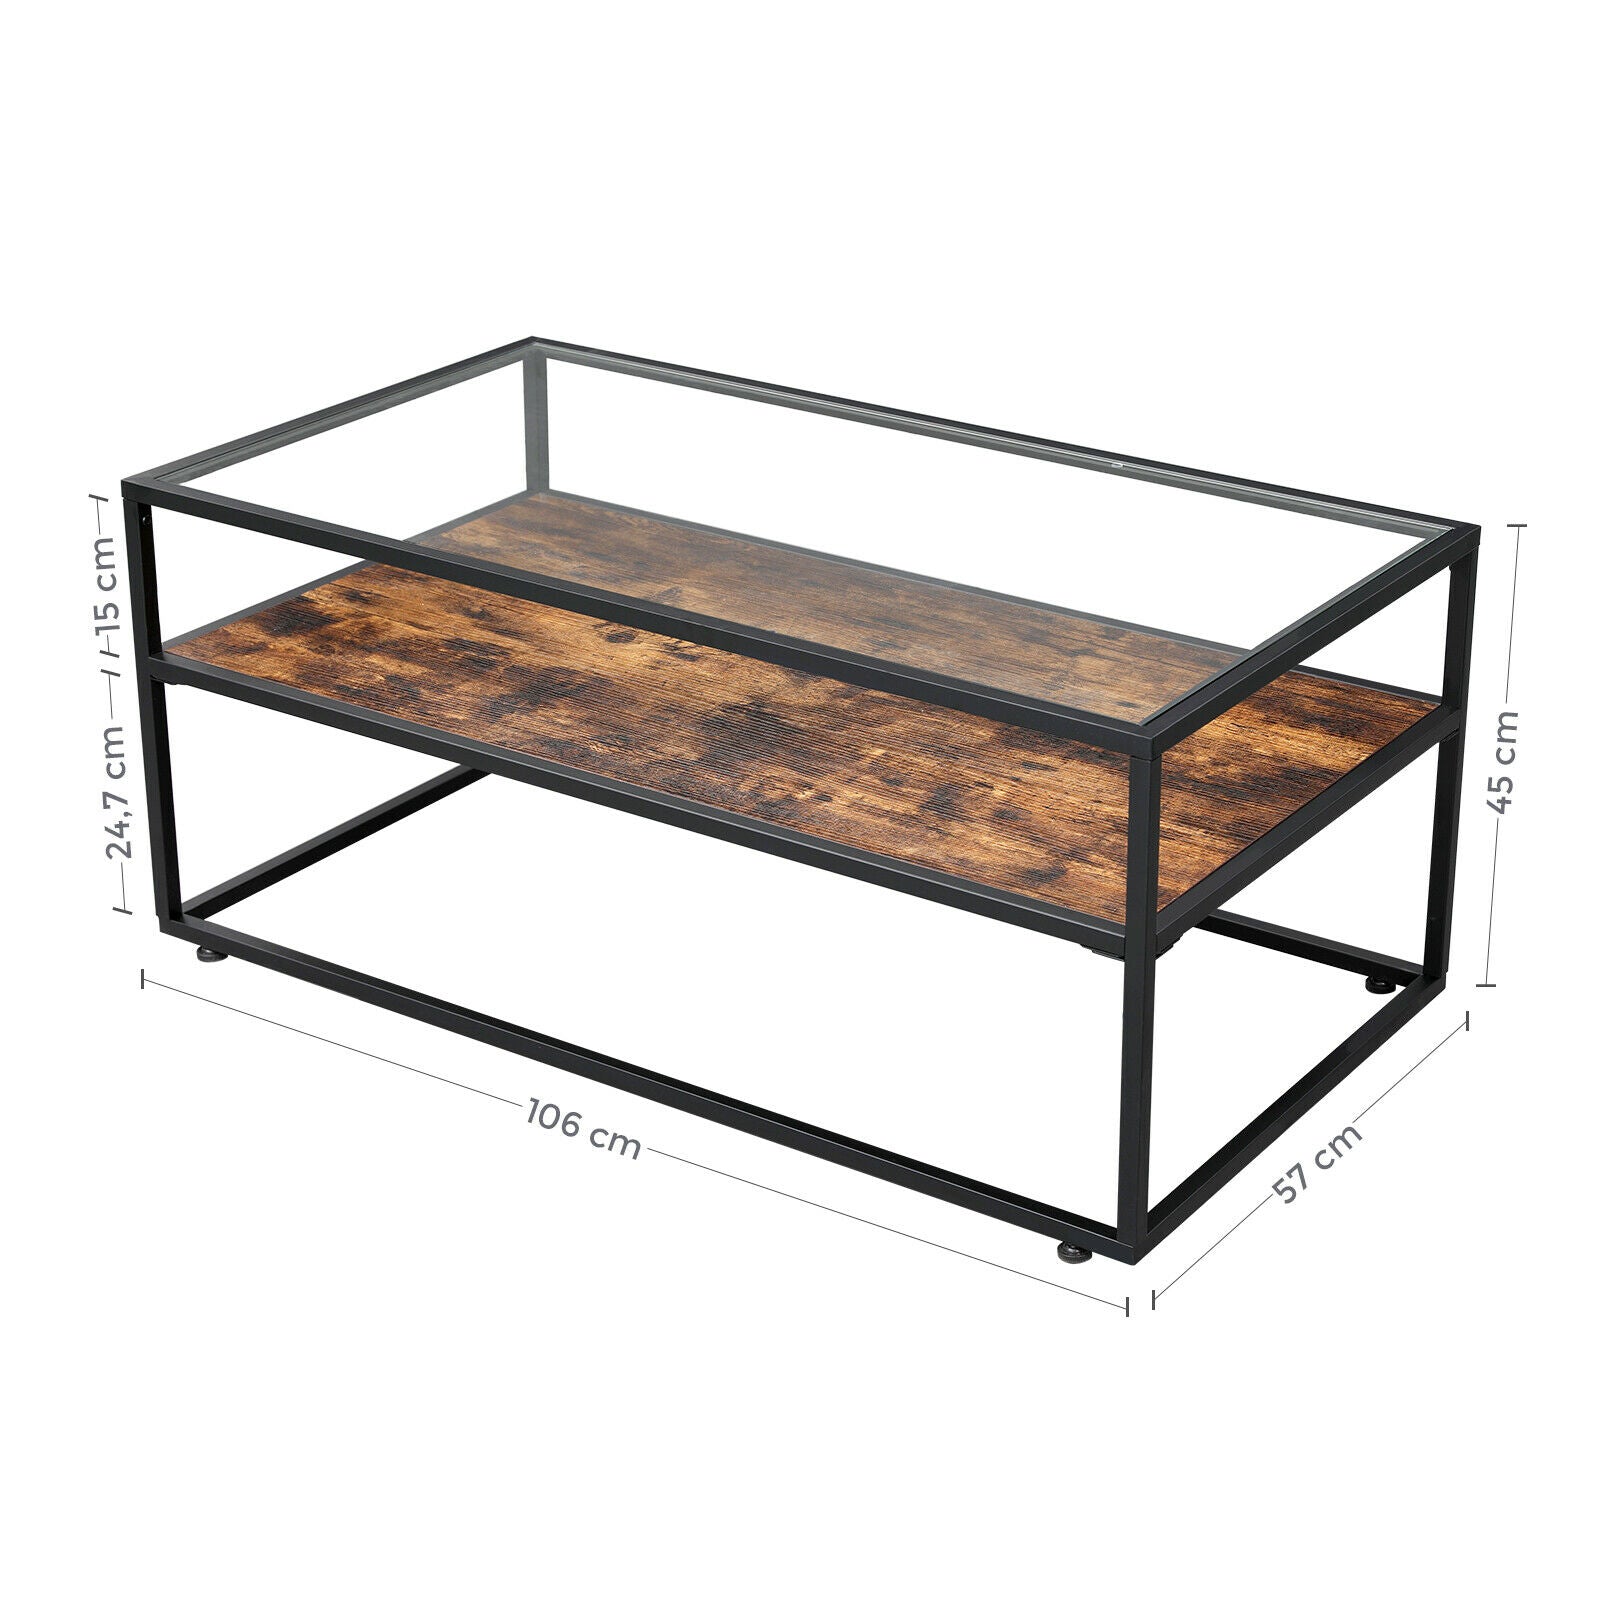 Rena Glass Coffee Table Rustic Vintage Style